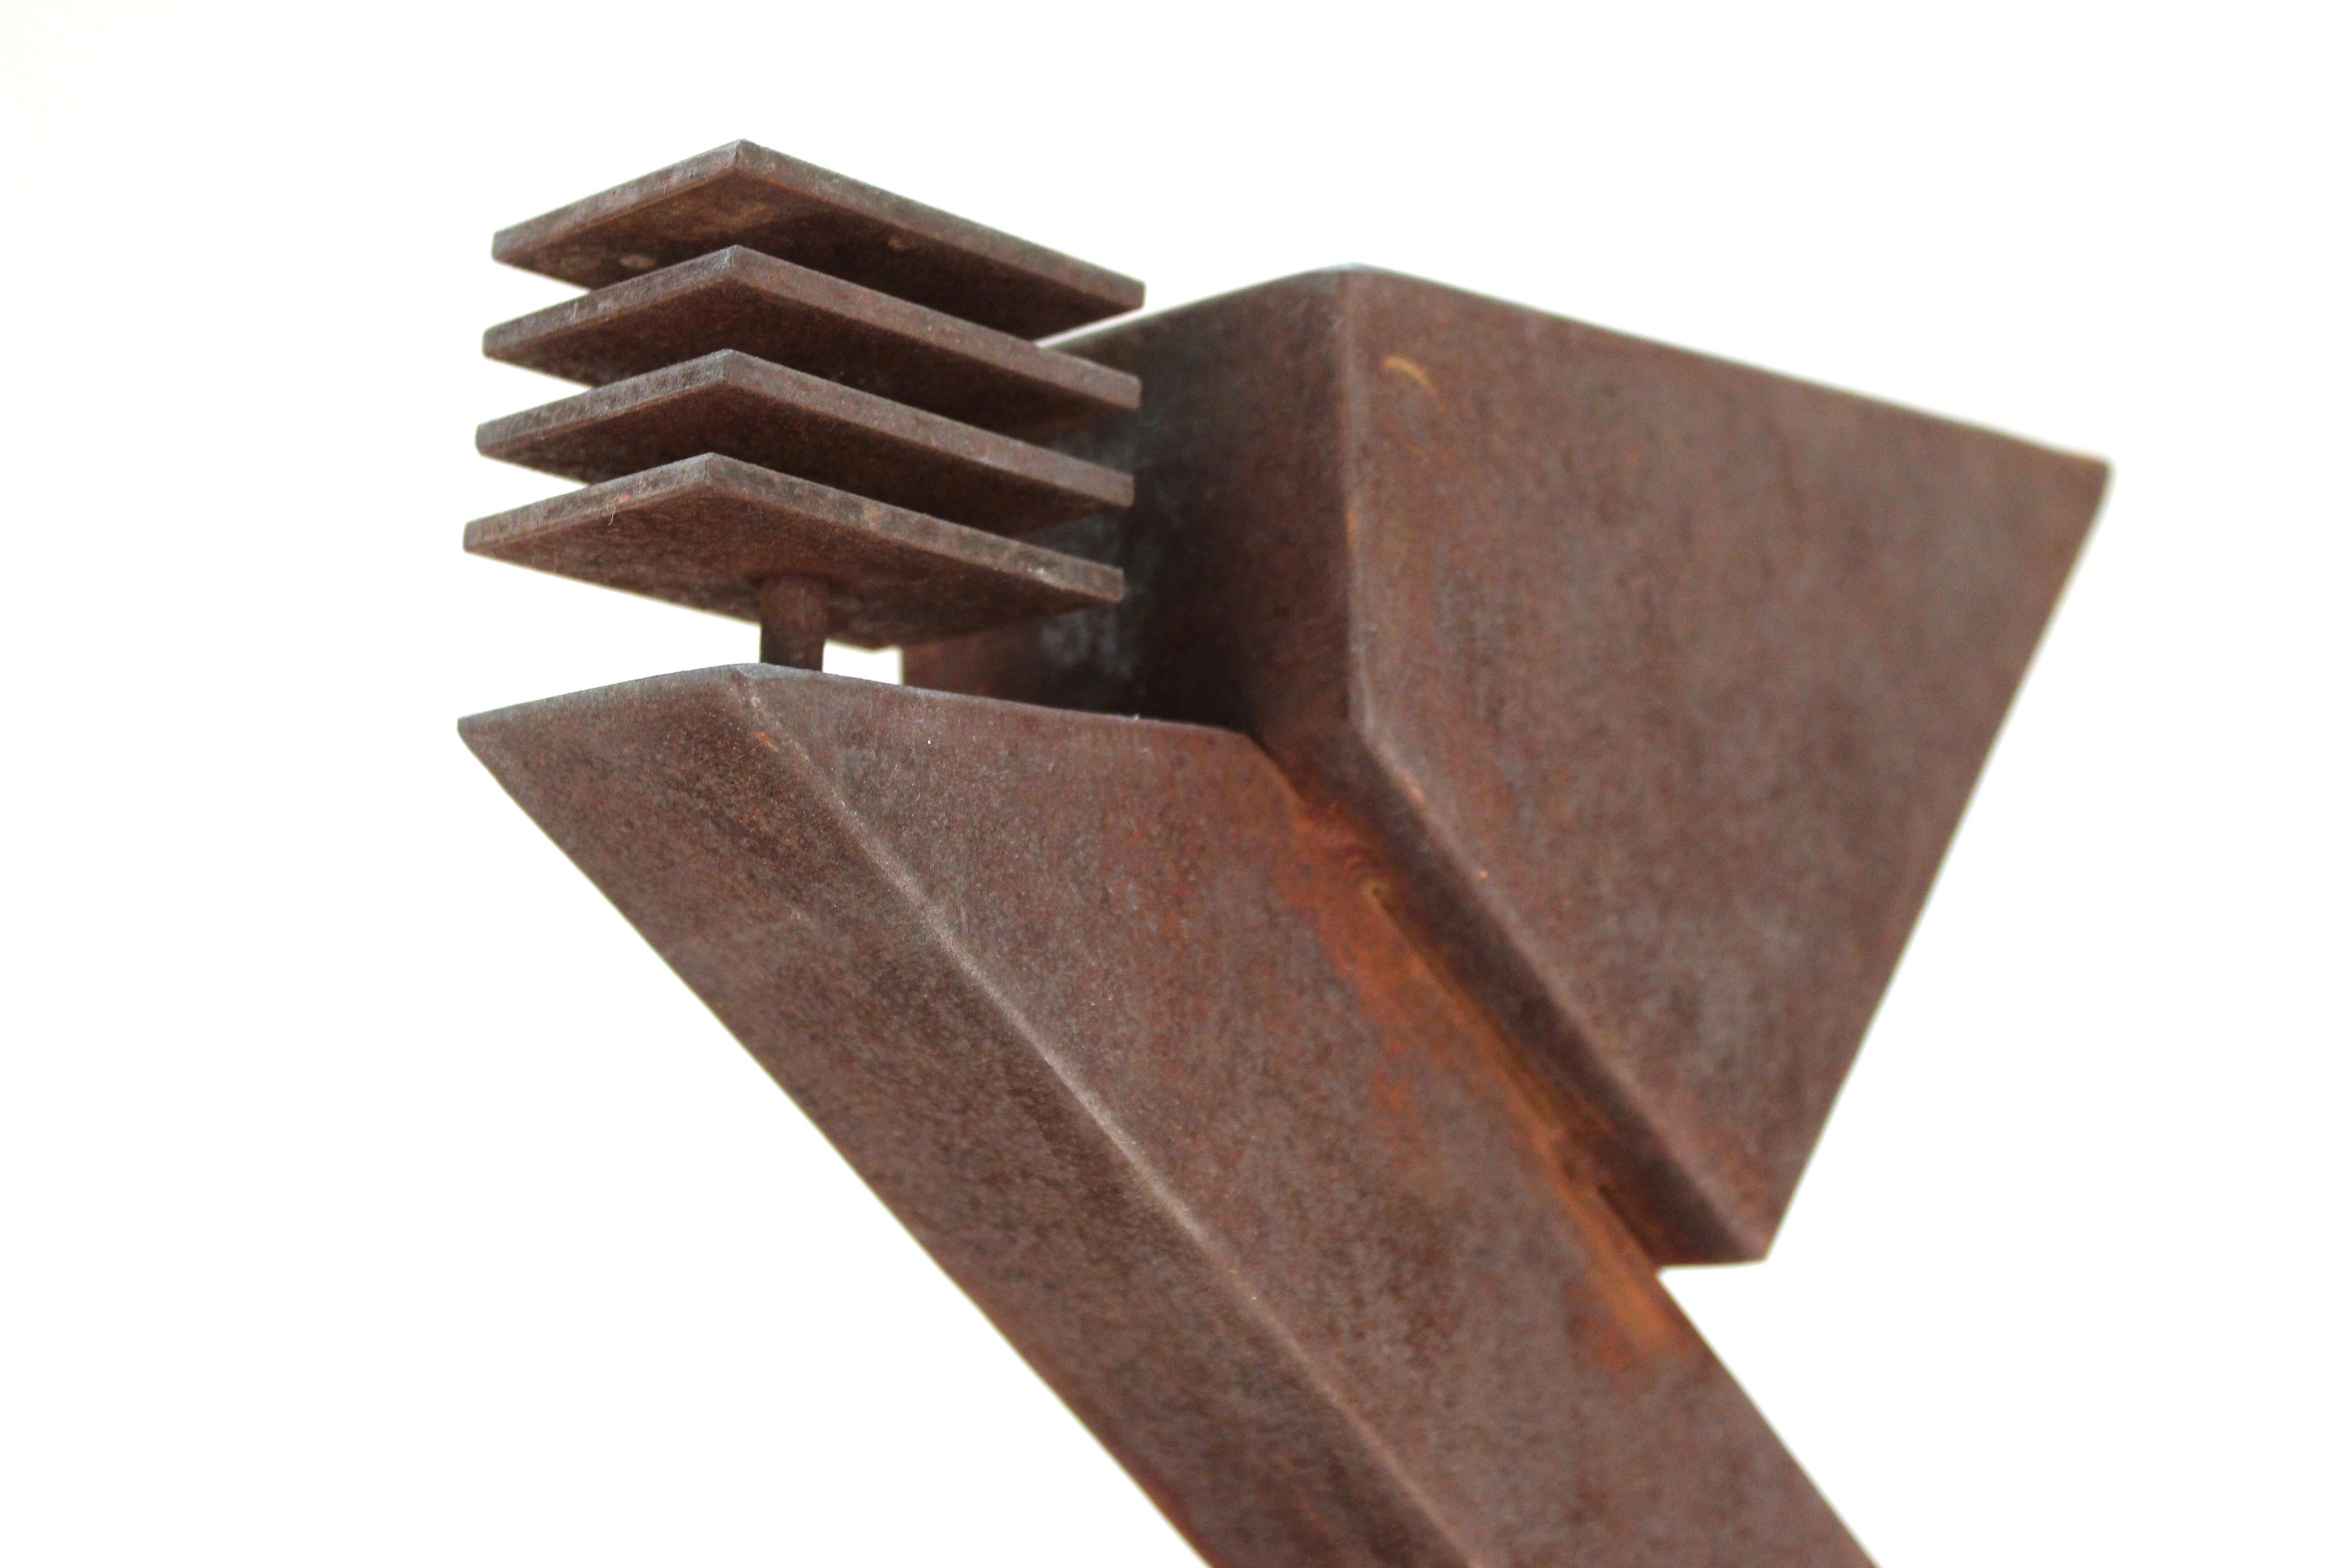 American Modern Abstract Brutalist TOTEM Sculpture For Sale 7